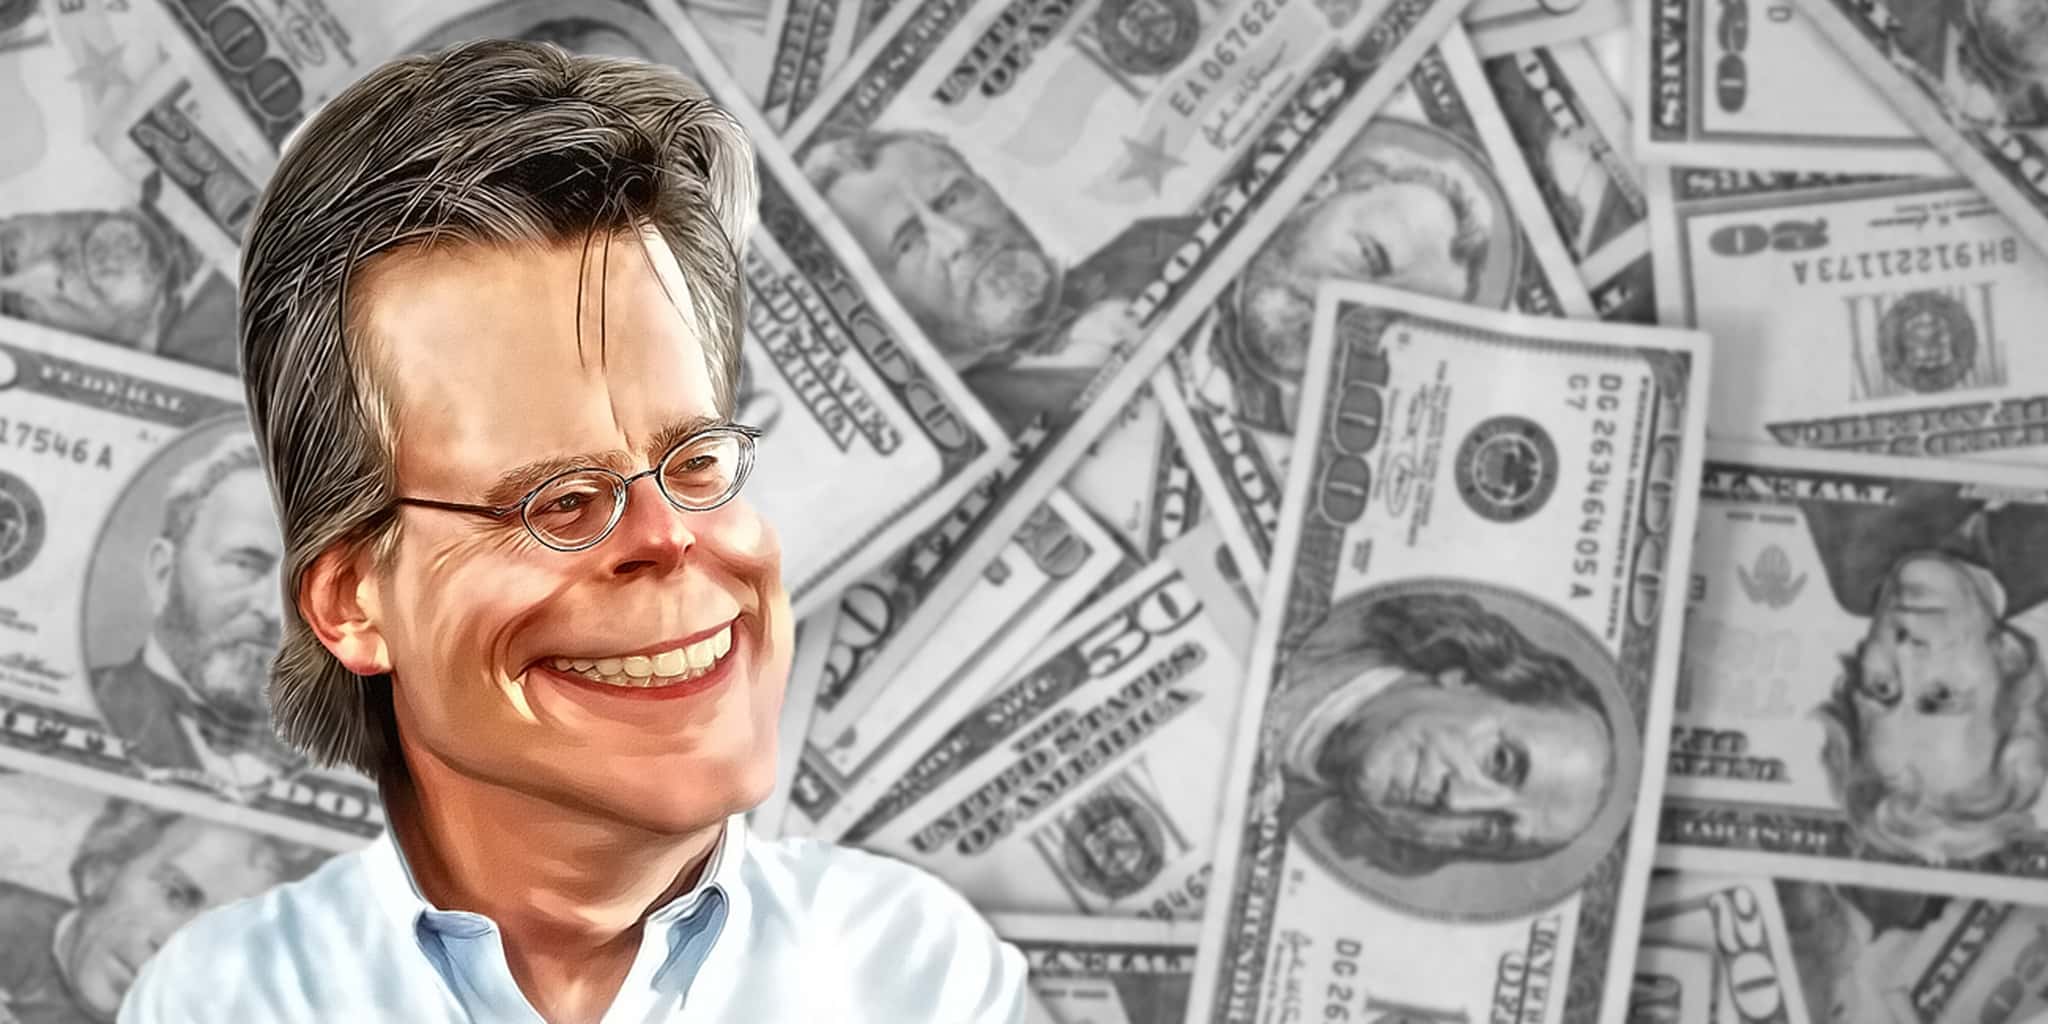 26 Disturbing Facts About The Works of Stephen King